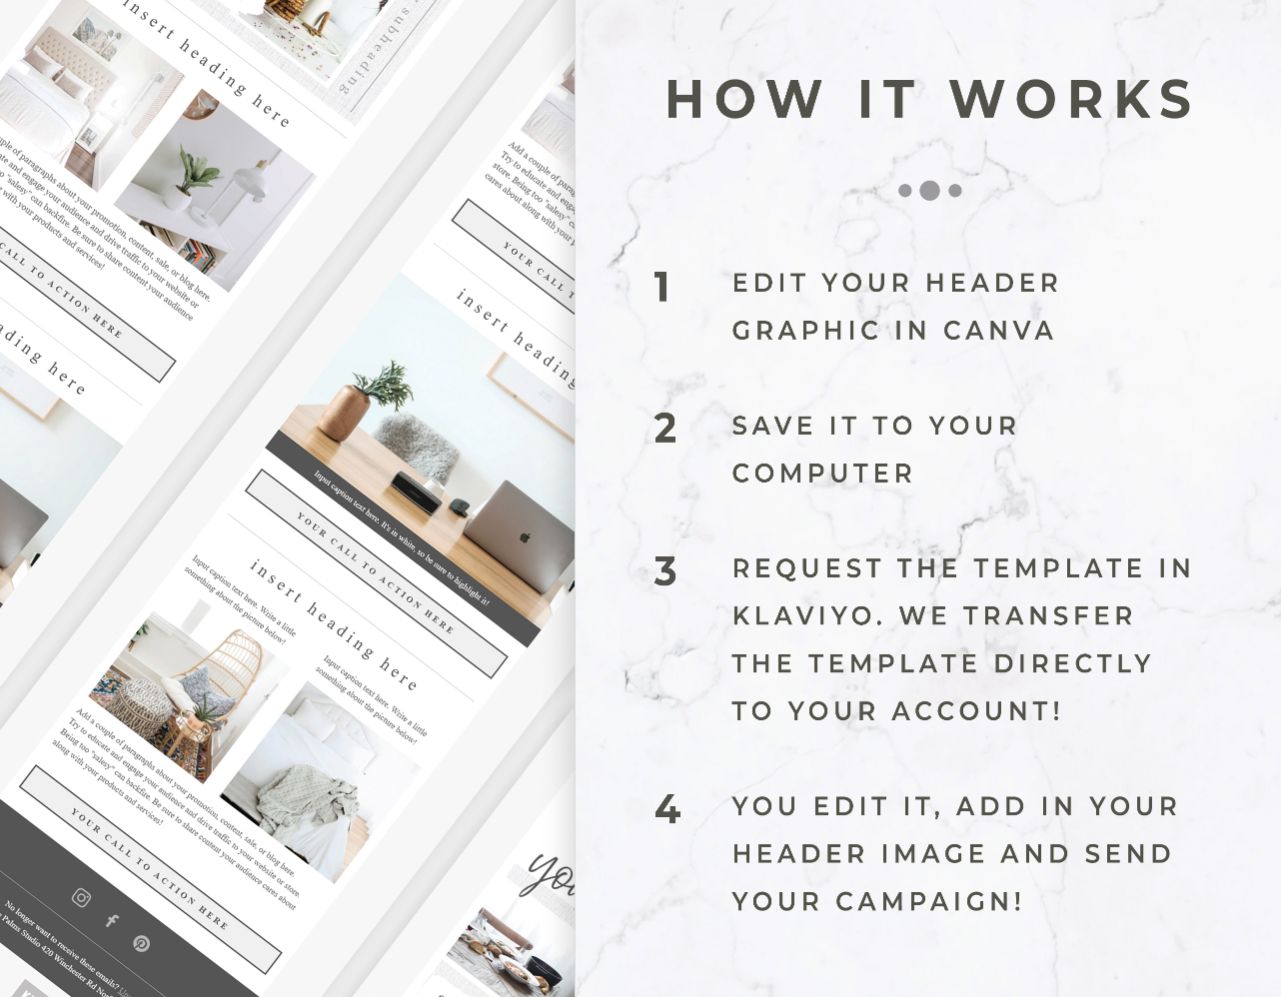 Email Template for Canva & Klaviyo - White Linen